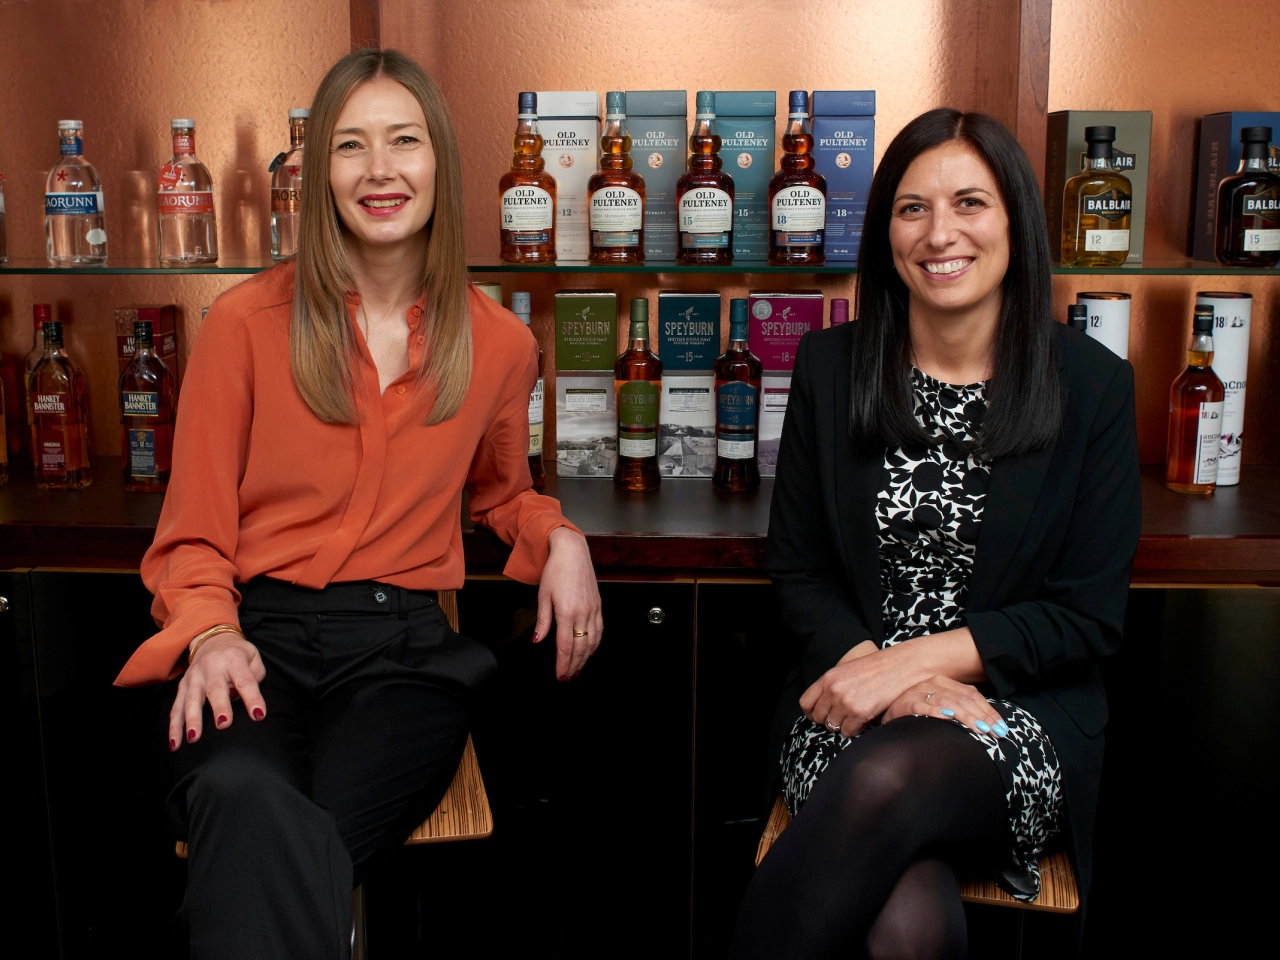 Fiona Meldrum joins as Head of Supply Chain and Laura Millar joins as Head of Finance and Risk